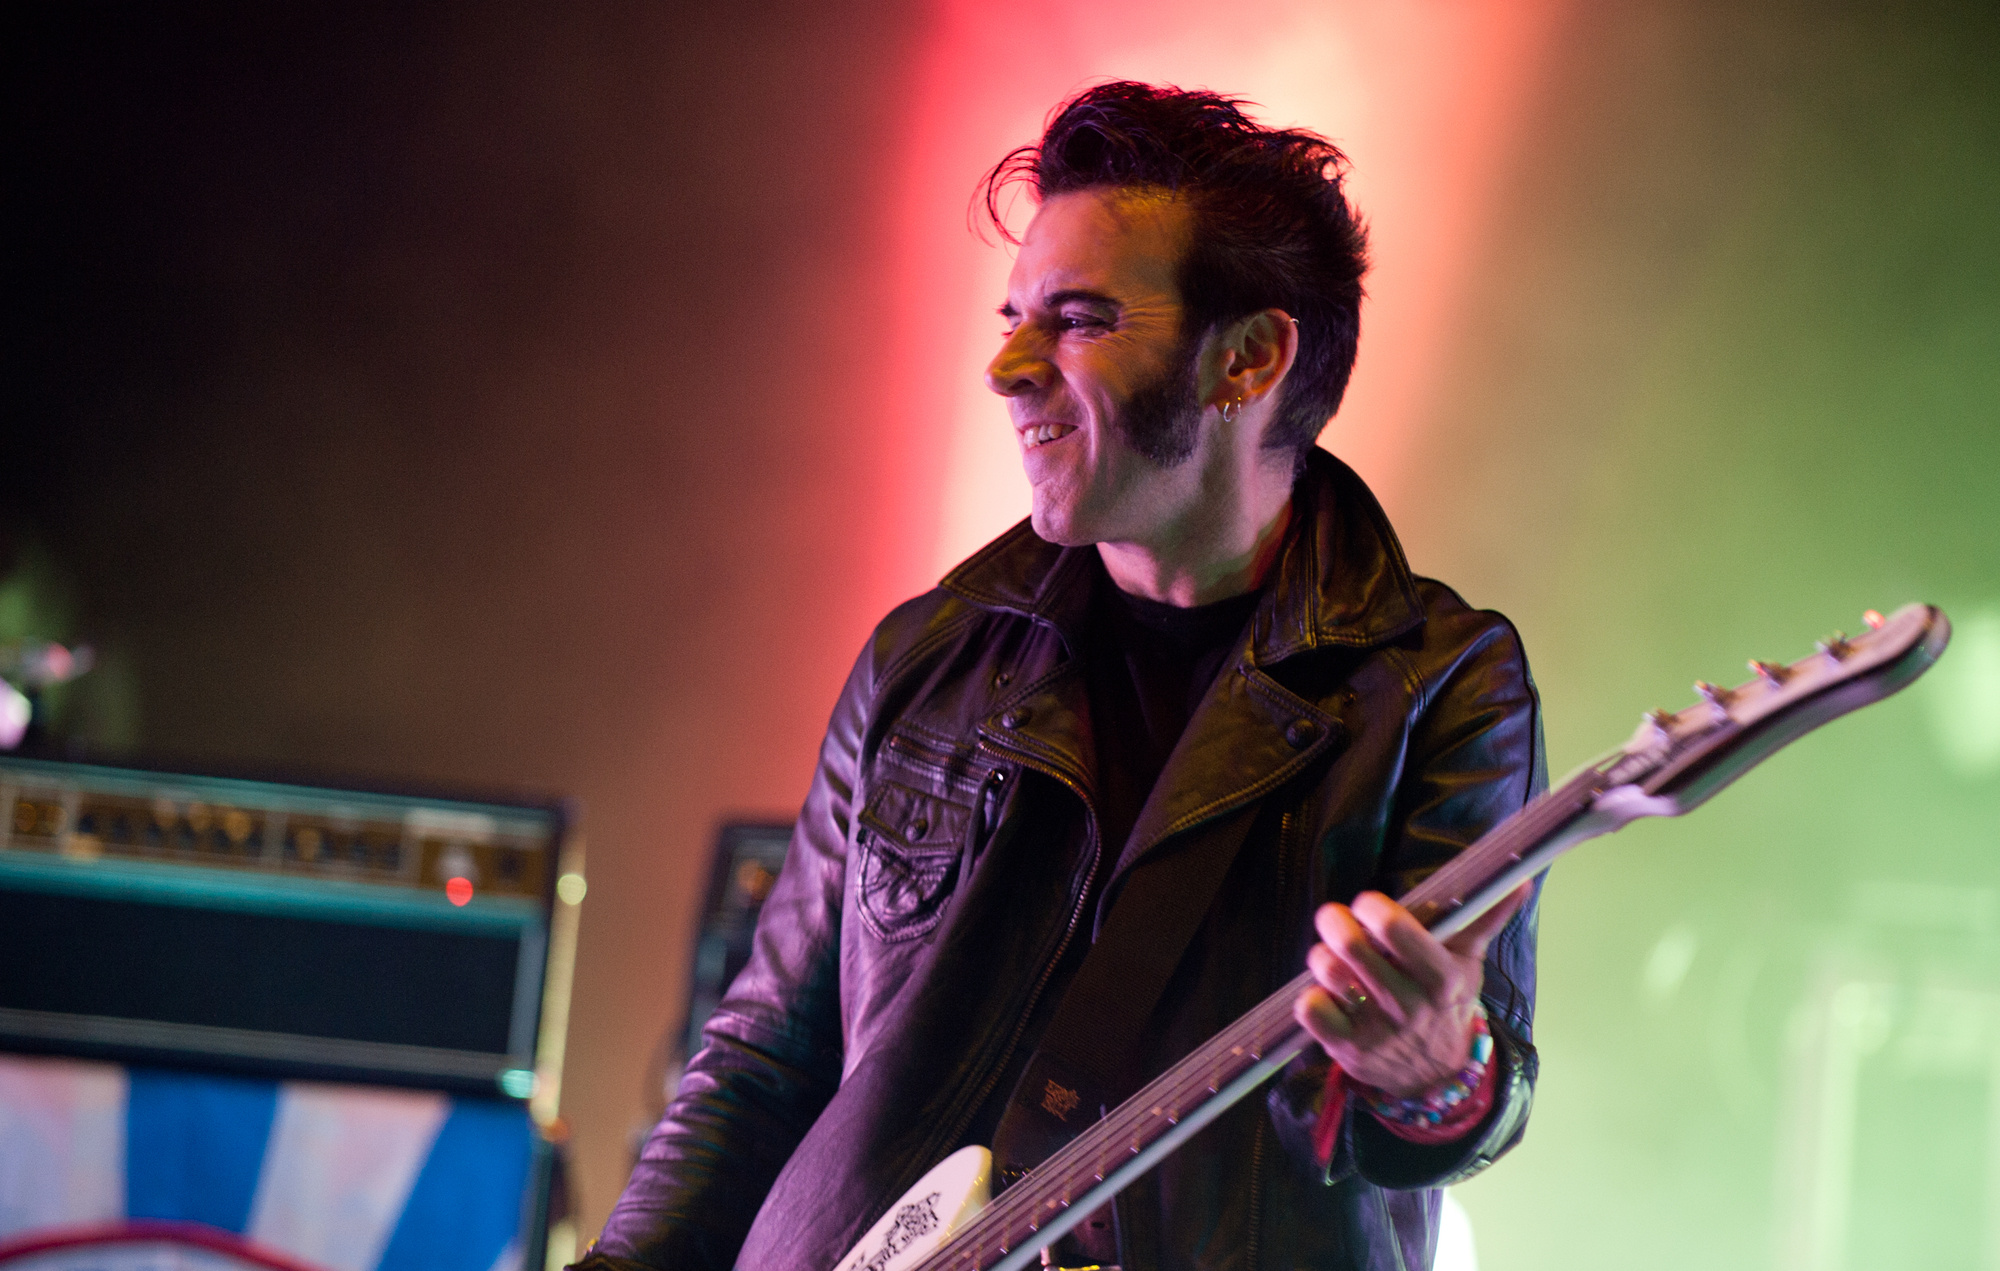 Simon Gallup, The Cure bassist, Austin City Limits performance, Forced to pull out, 2000x1280 HD Desktop